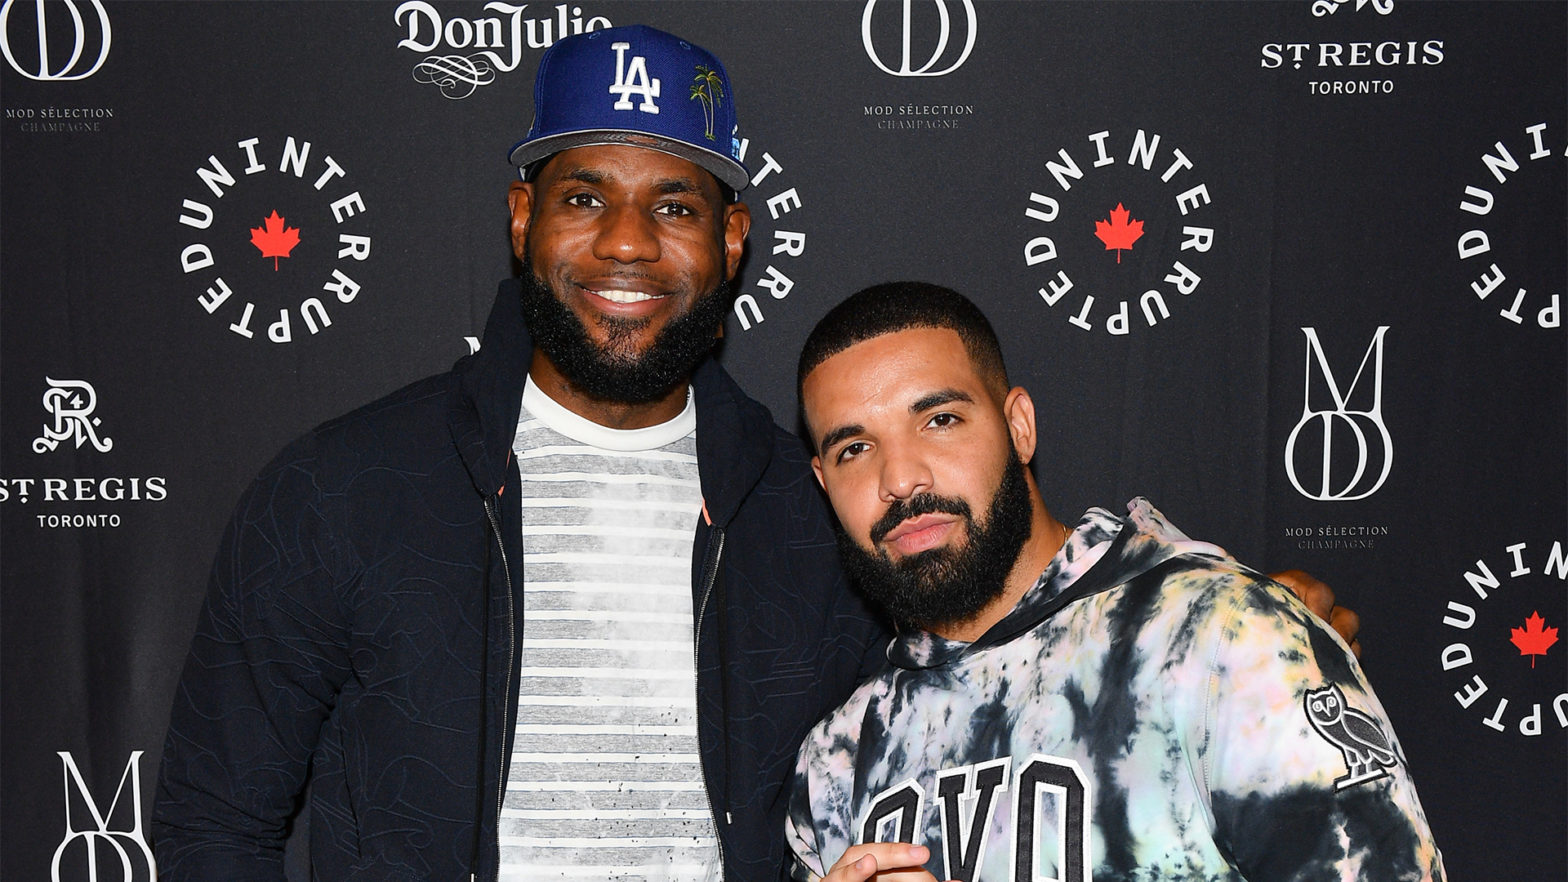 LeBron James, Drake Bet On The Nearly $10B Residential Solar Market By Investing In A Clean Energy Startup